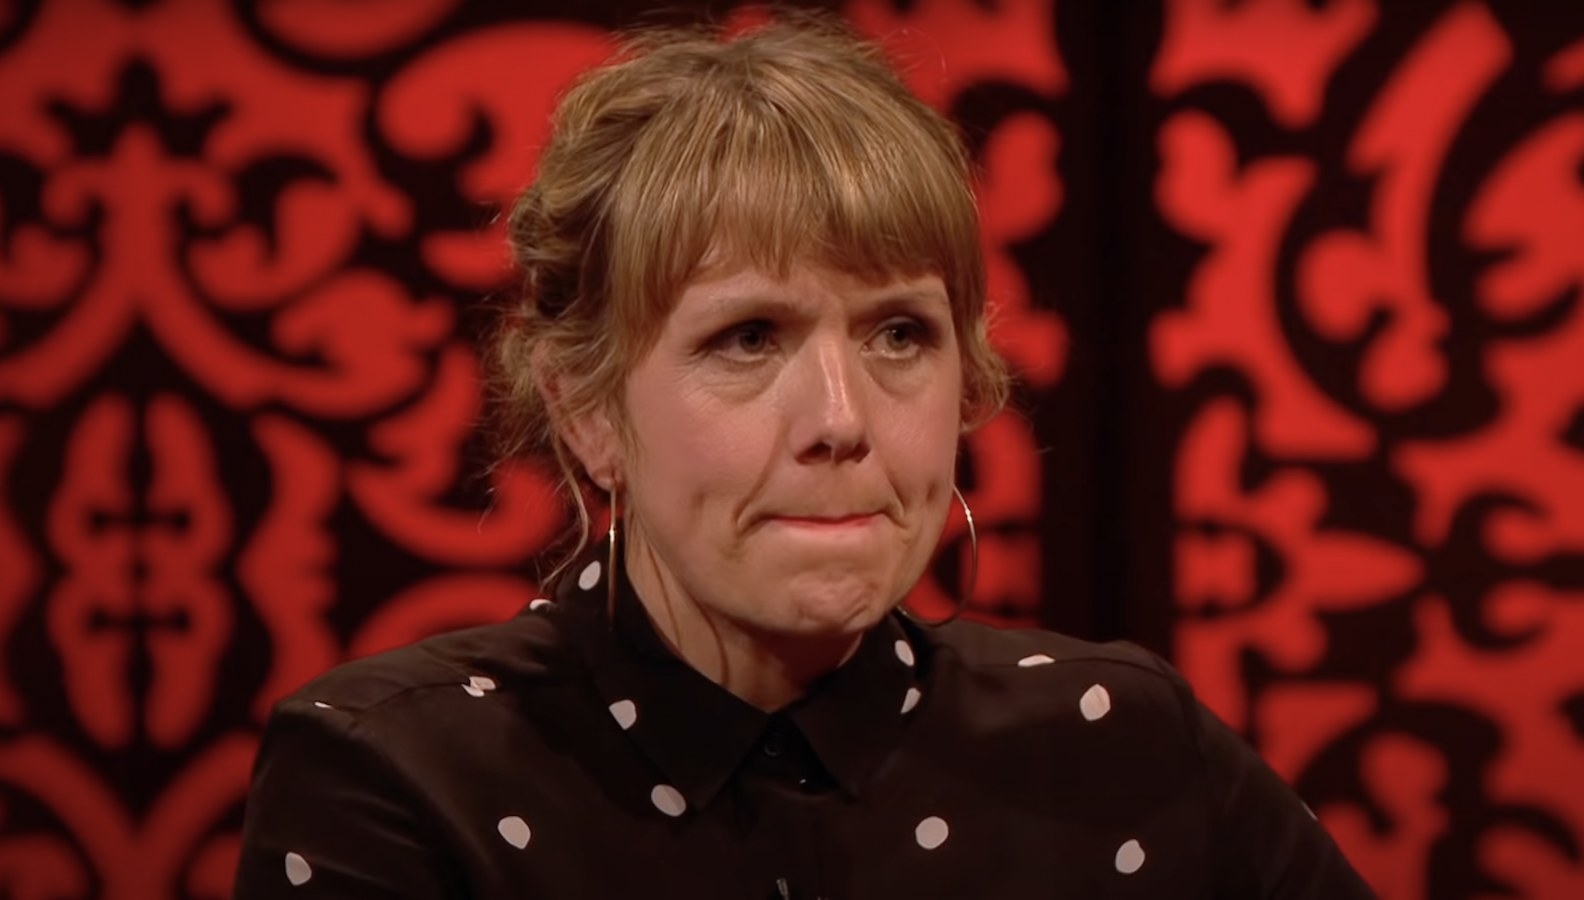 Kerry Godliman on Taskmaster looking concerned and annoyed